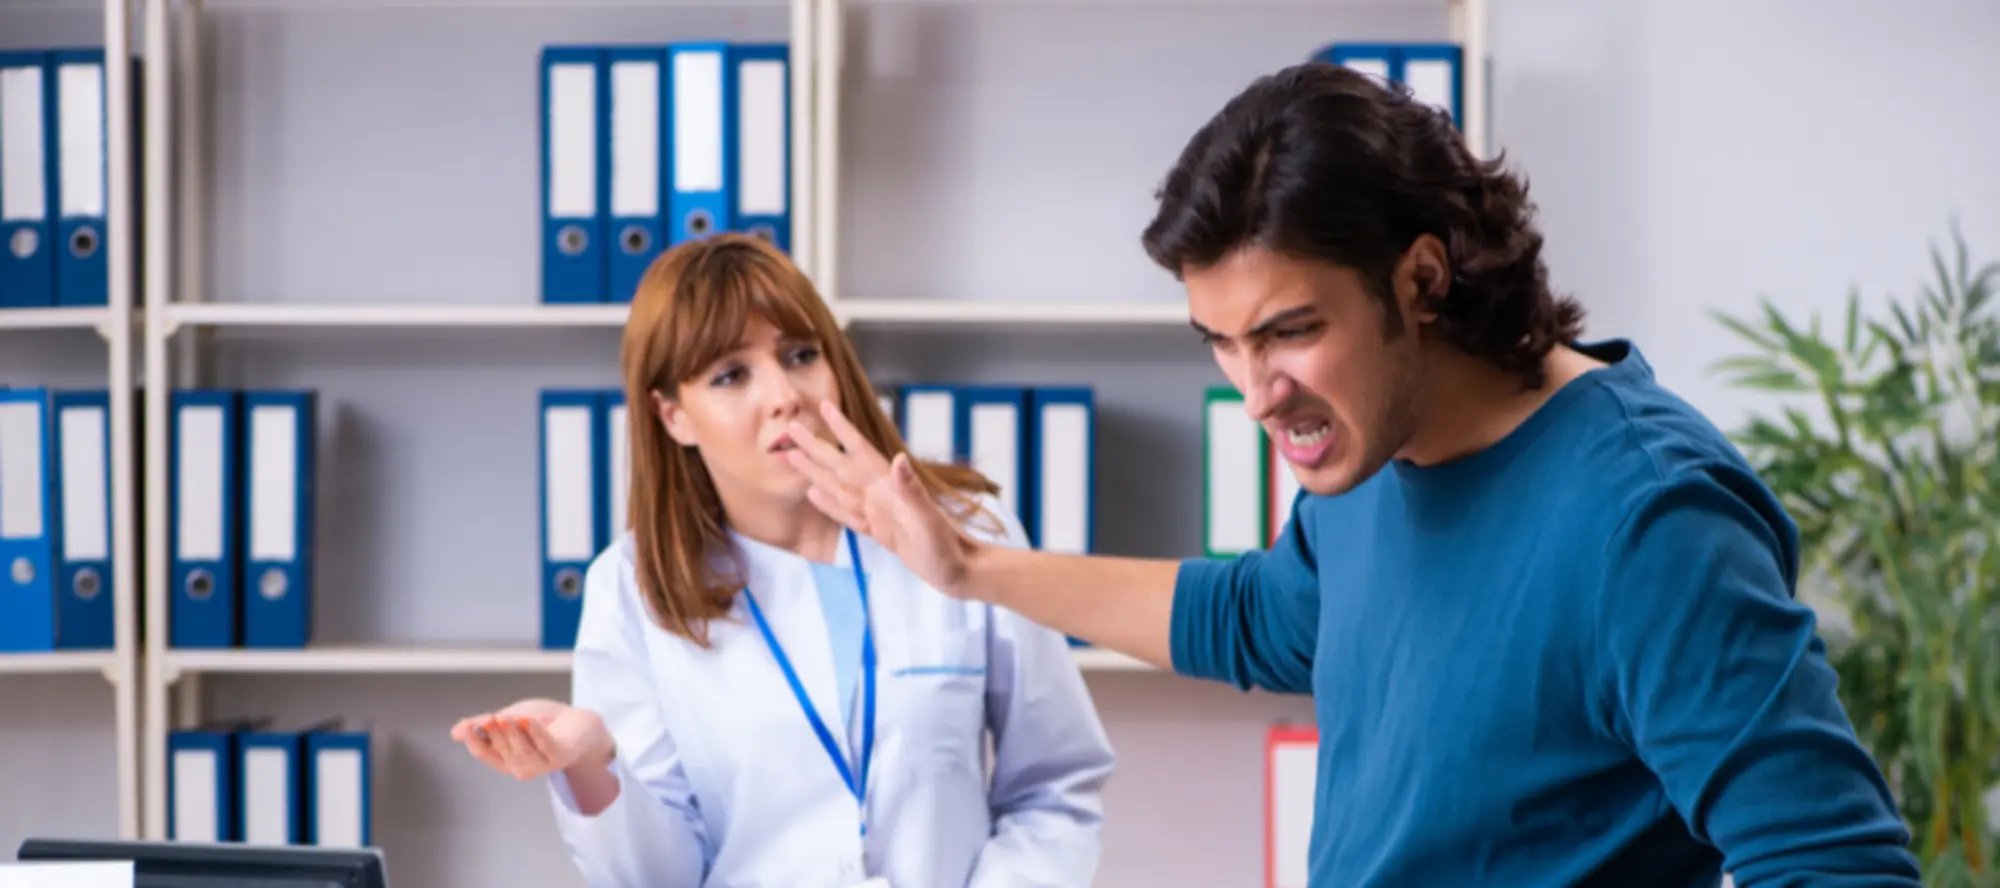 Managing conflict with angry patient